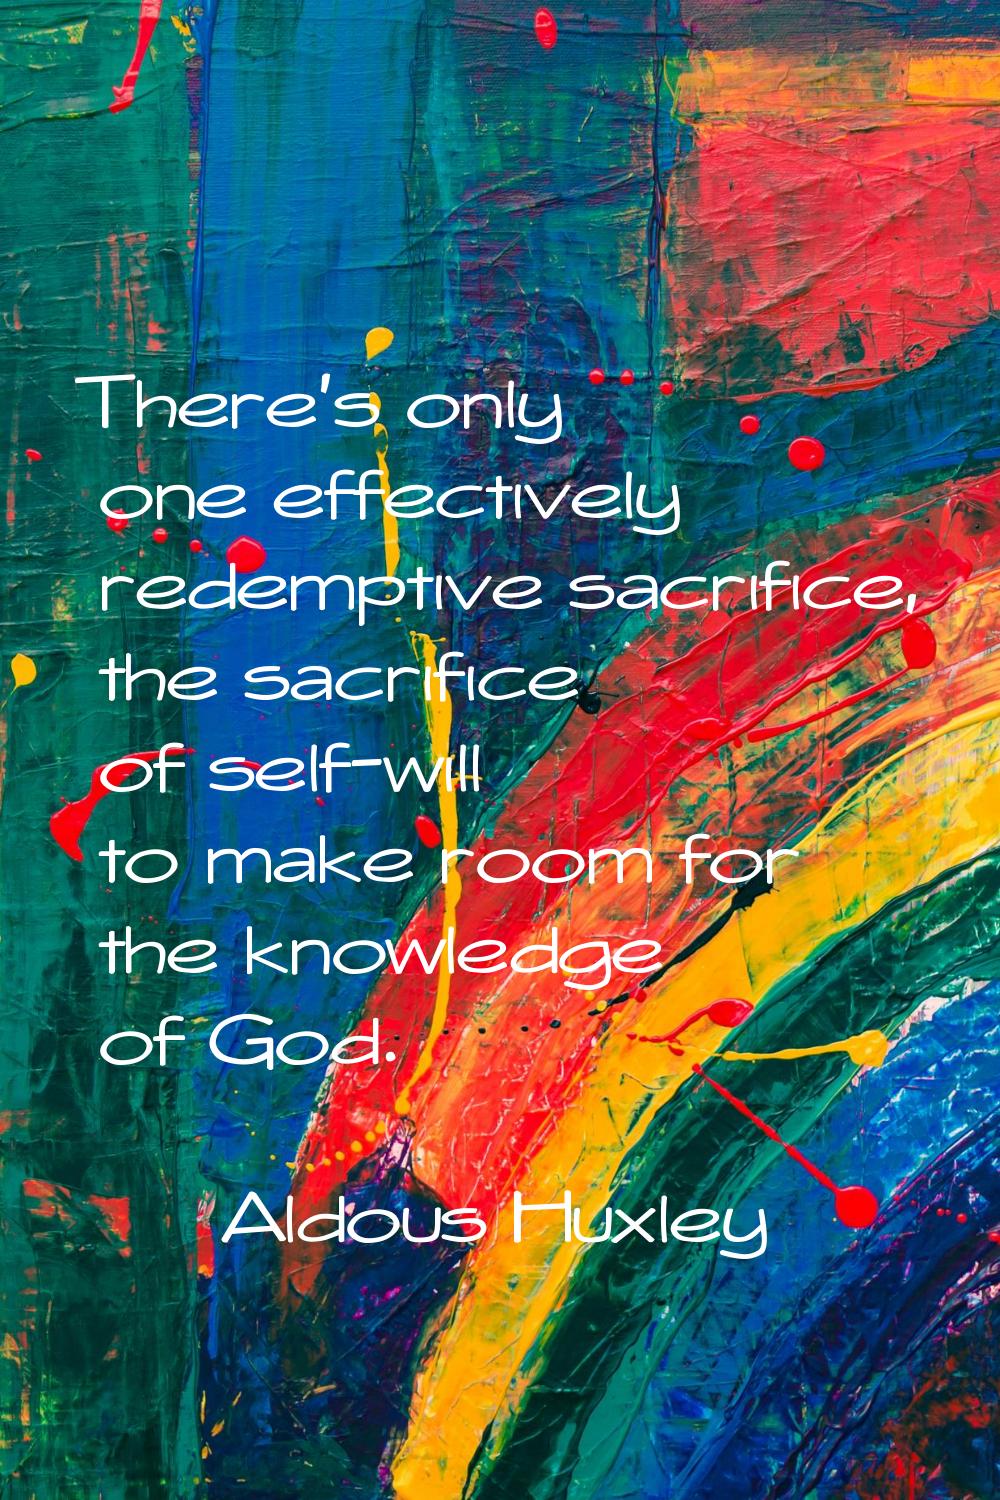 There's only one effectively redemptive sacrifice, the sacrifice of self-will to make room for the 